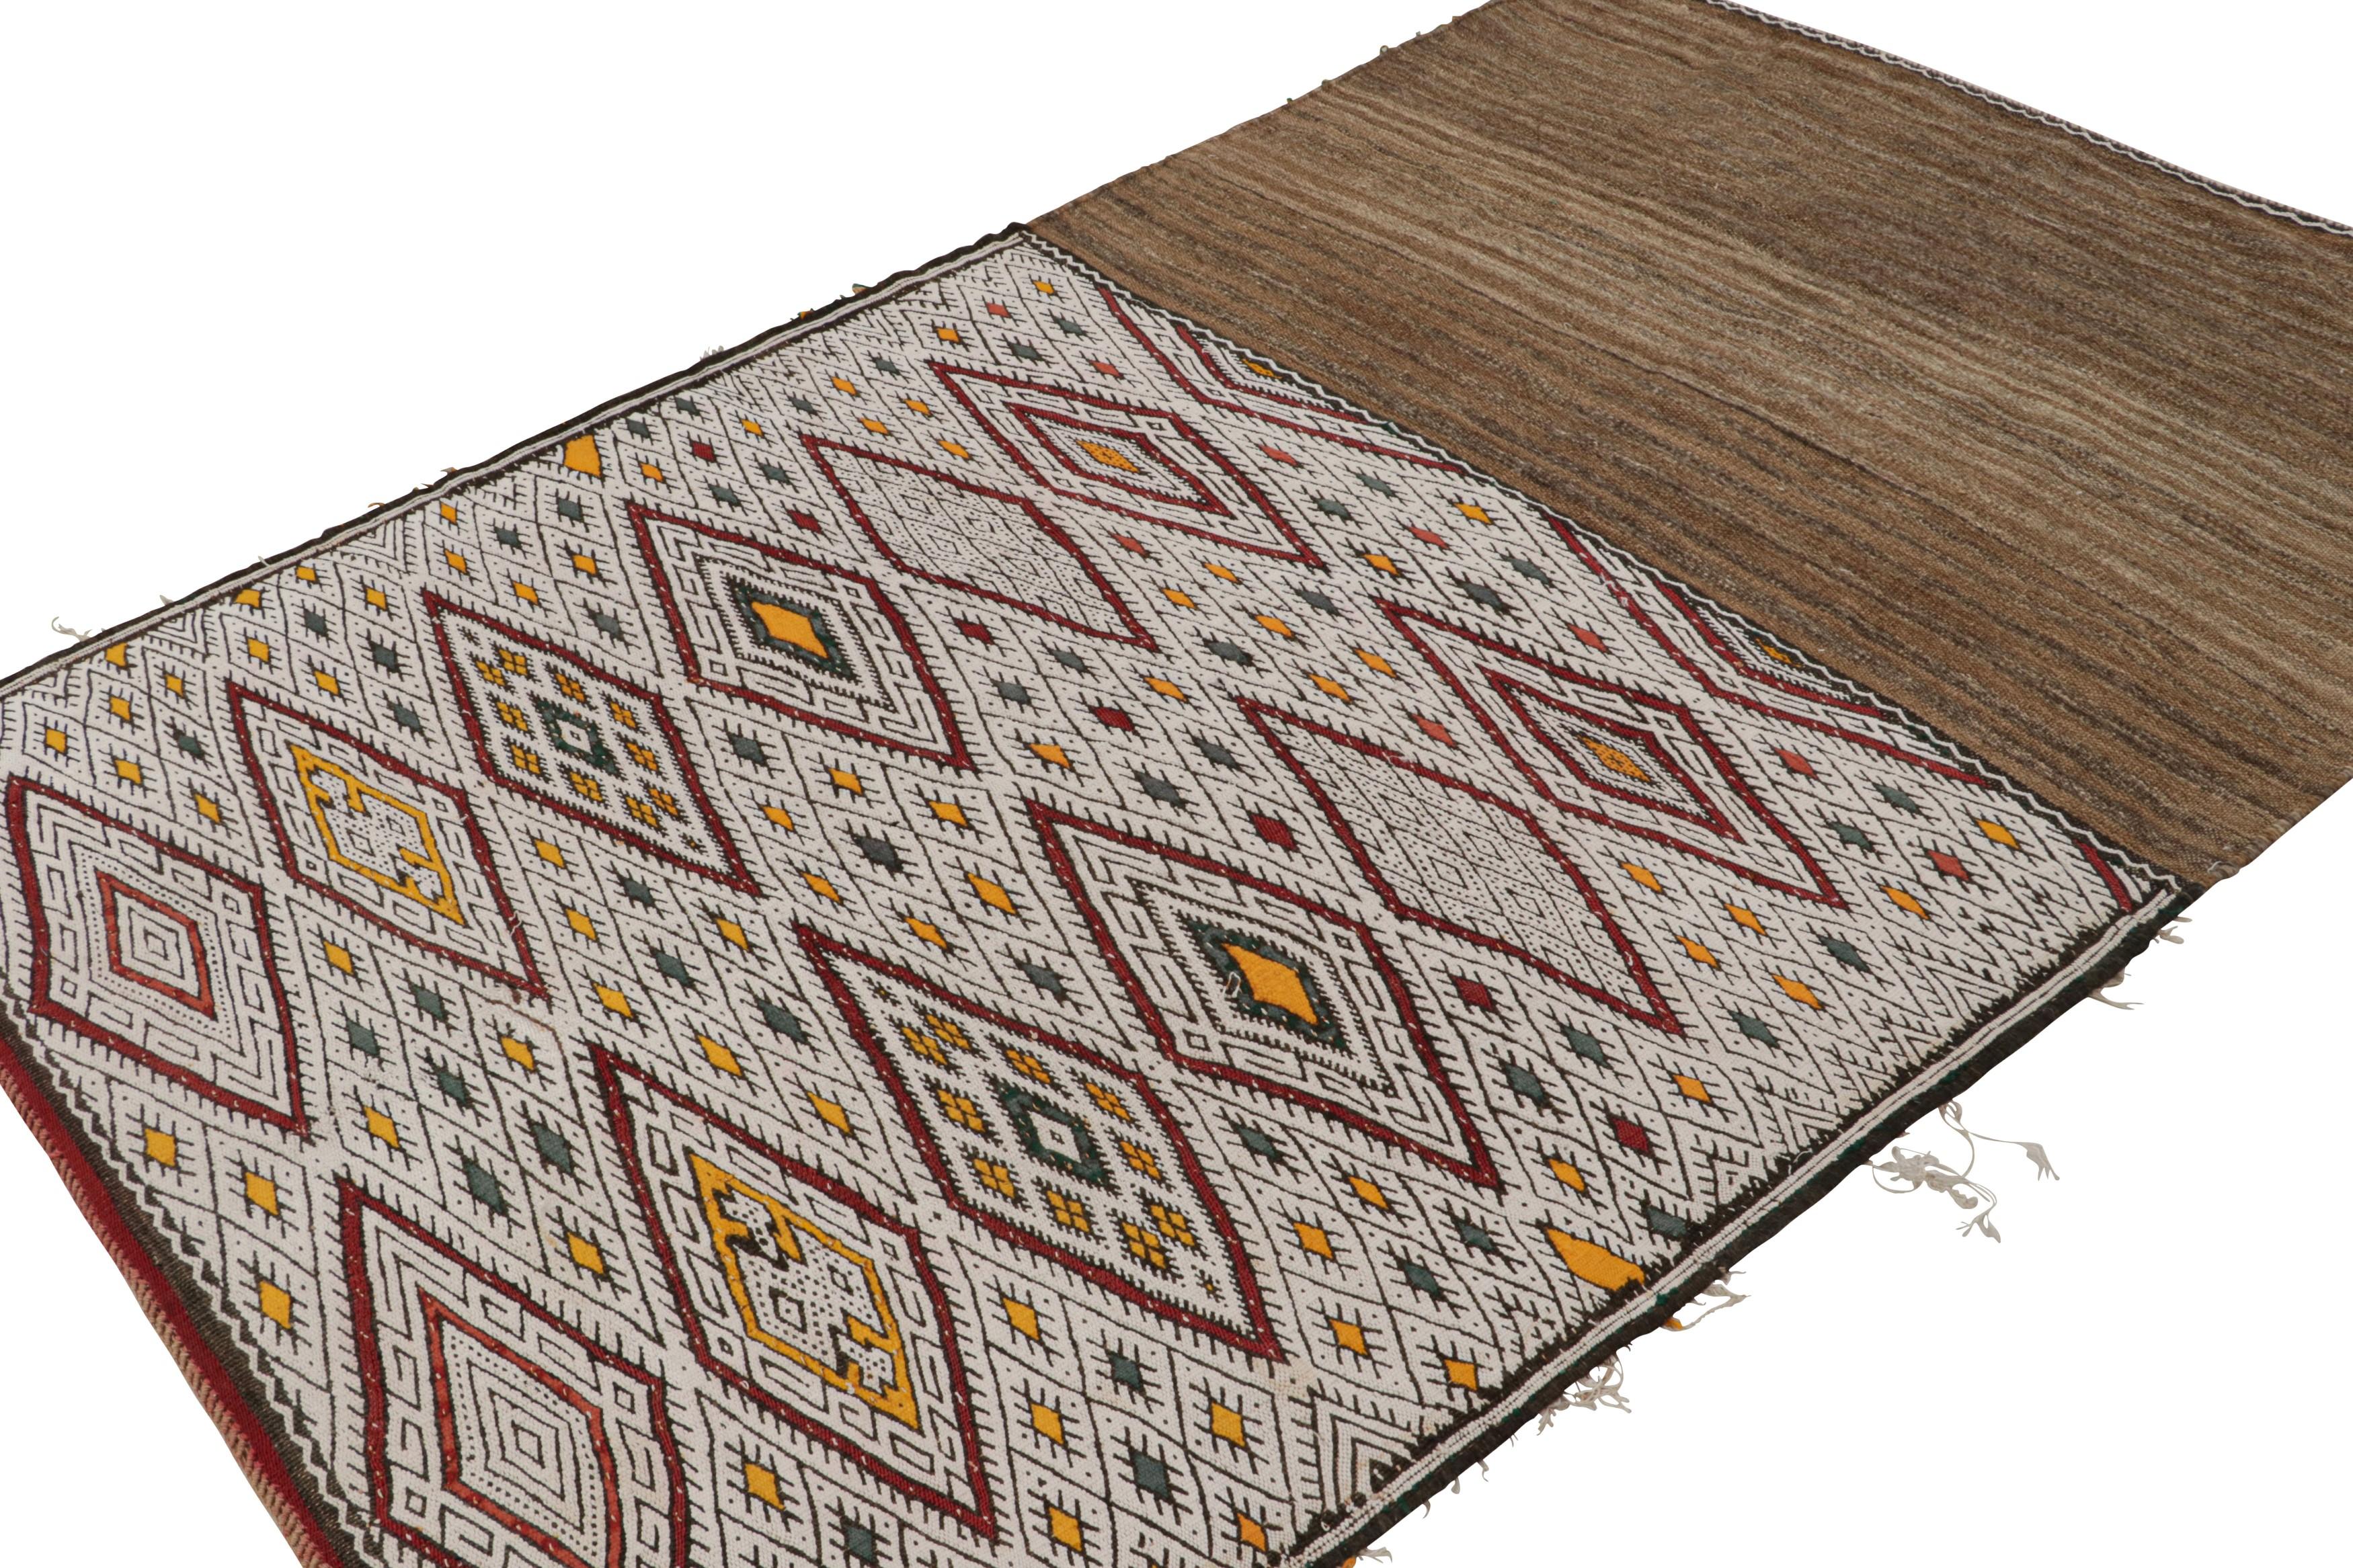 Handwoven in wool, a vintage 5x8 Zayane Moroccan Kilim - believed to originate from the Middle Atlas mountain range in Morocco.

On the Design:

This piece is particularly special for its similarity to tribal bags opened up from other cultures.